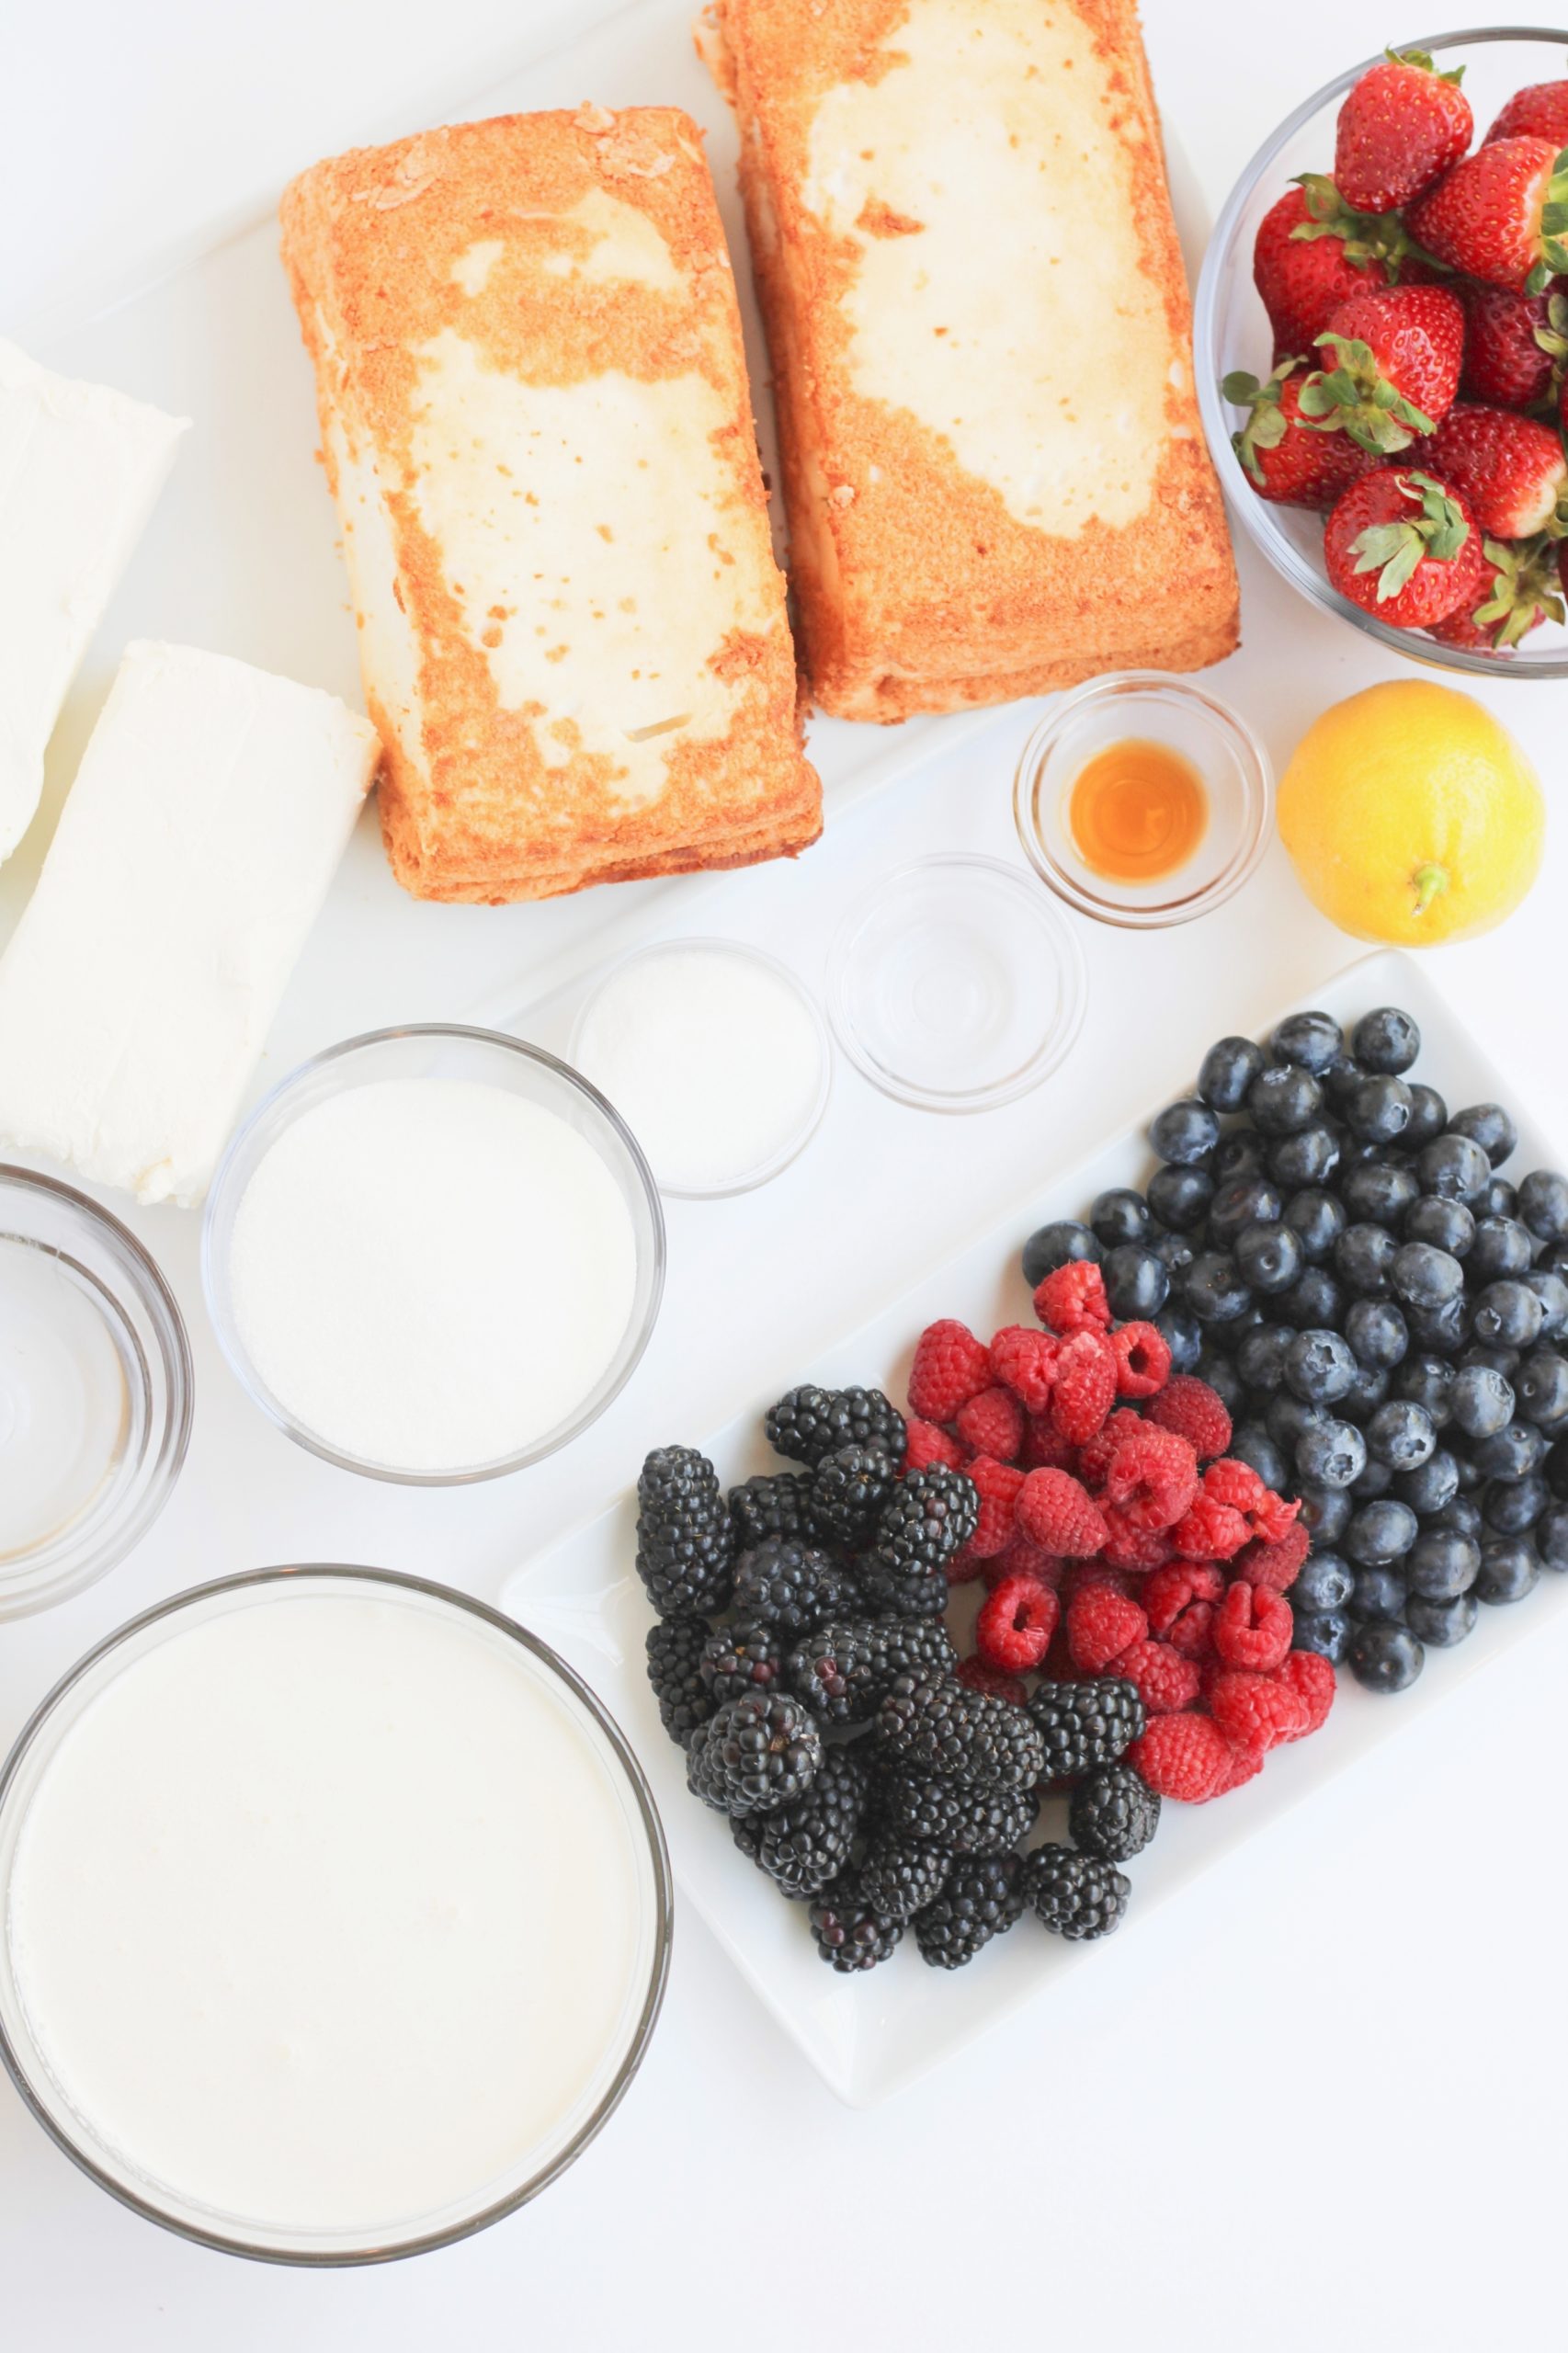 Pound cake, fresh berries and whipped topping.